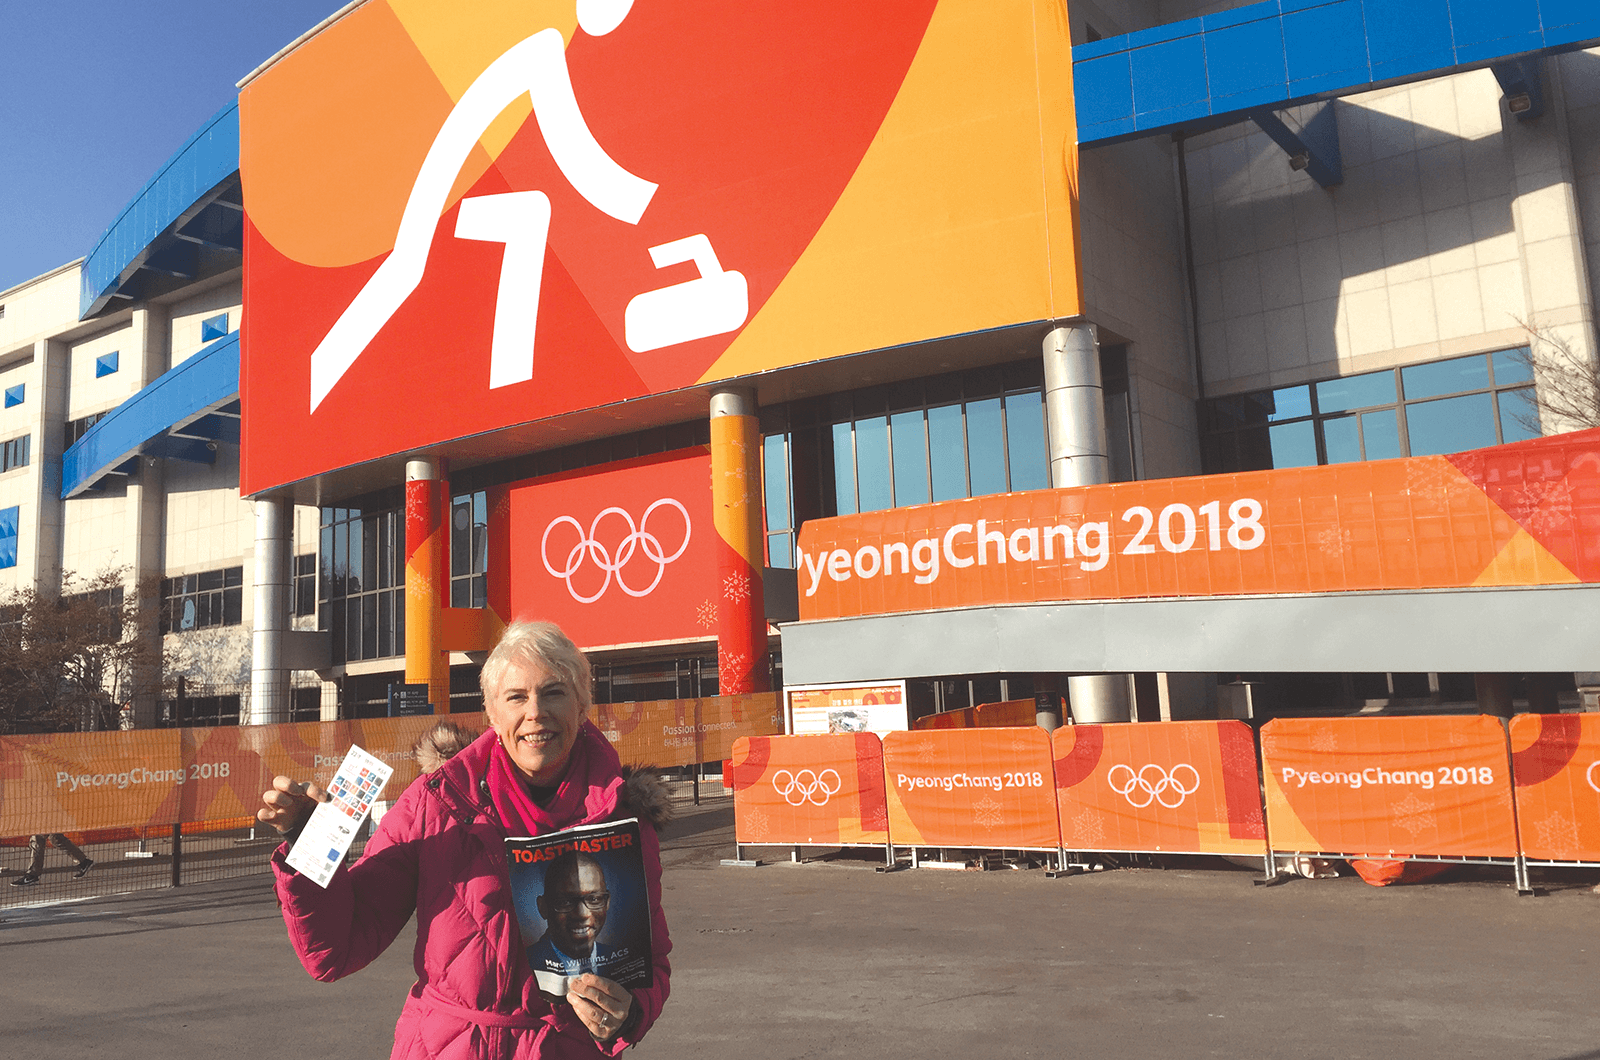 Laura Allen, DTM, from Berlin, Maryland, stays warm at the 2018 Winter Olympics in PyeongChang, South Korea.